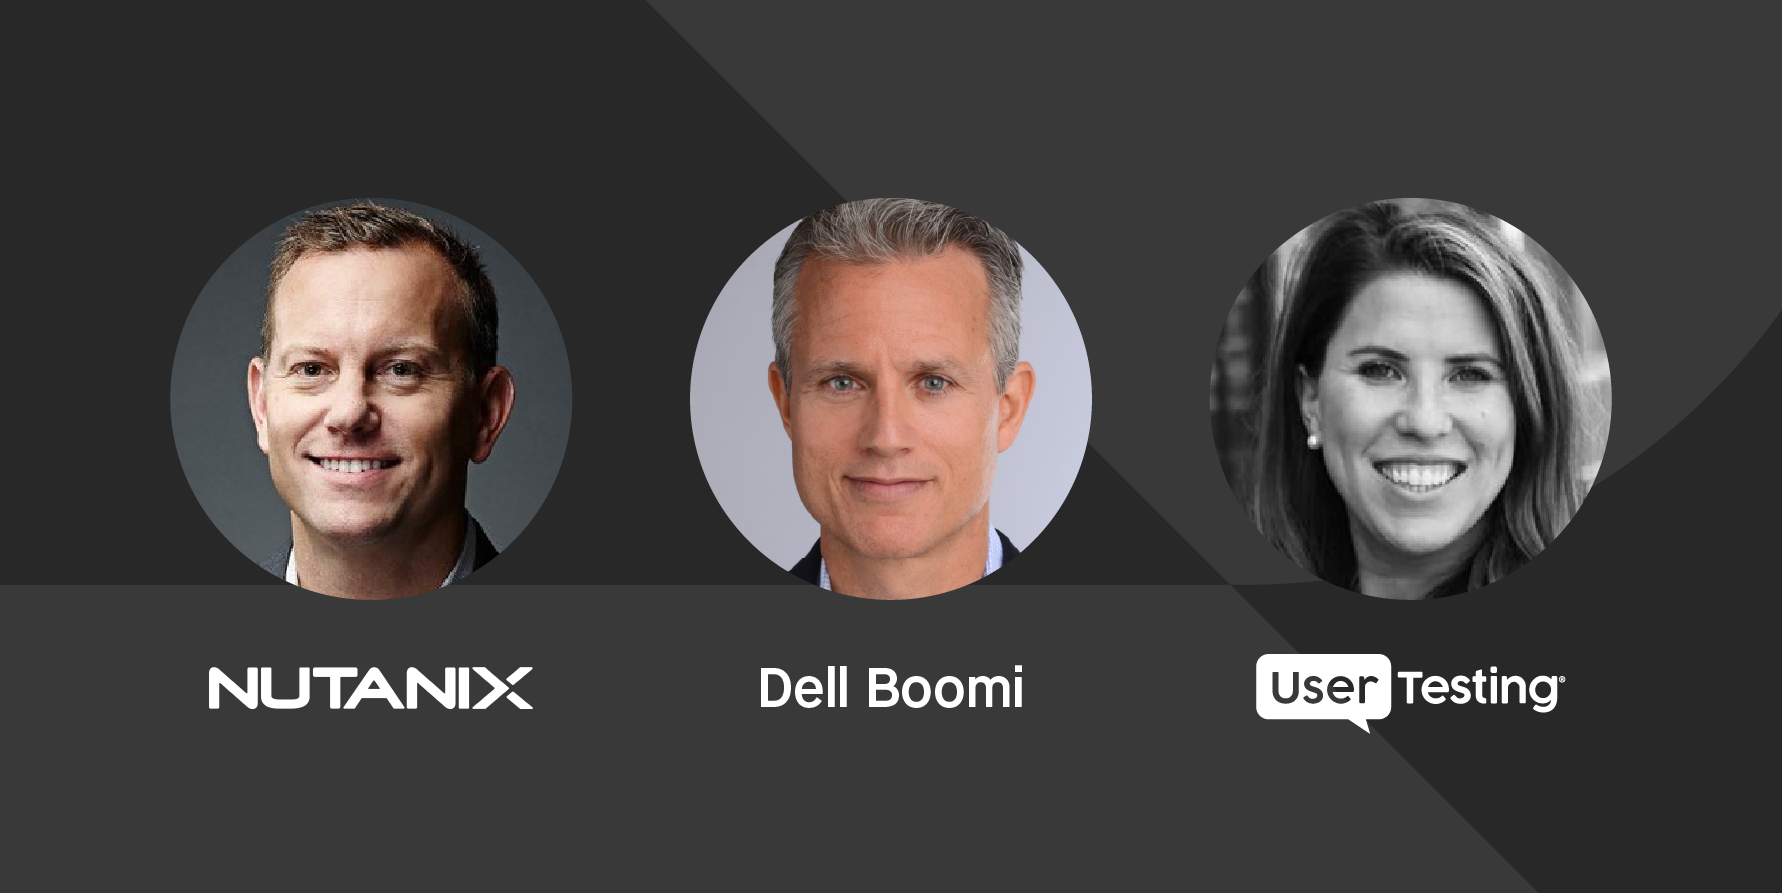 Headshot photographs of Brian Colin, Vice President of Sales at Nutanix; Will Corkery, Chief Revenue Officer at Dell Boomi; and Katie Harkins, Director of Sales at UserTesting